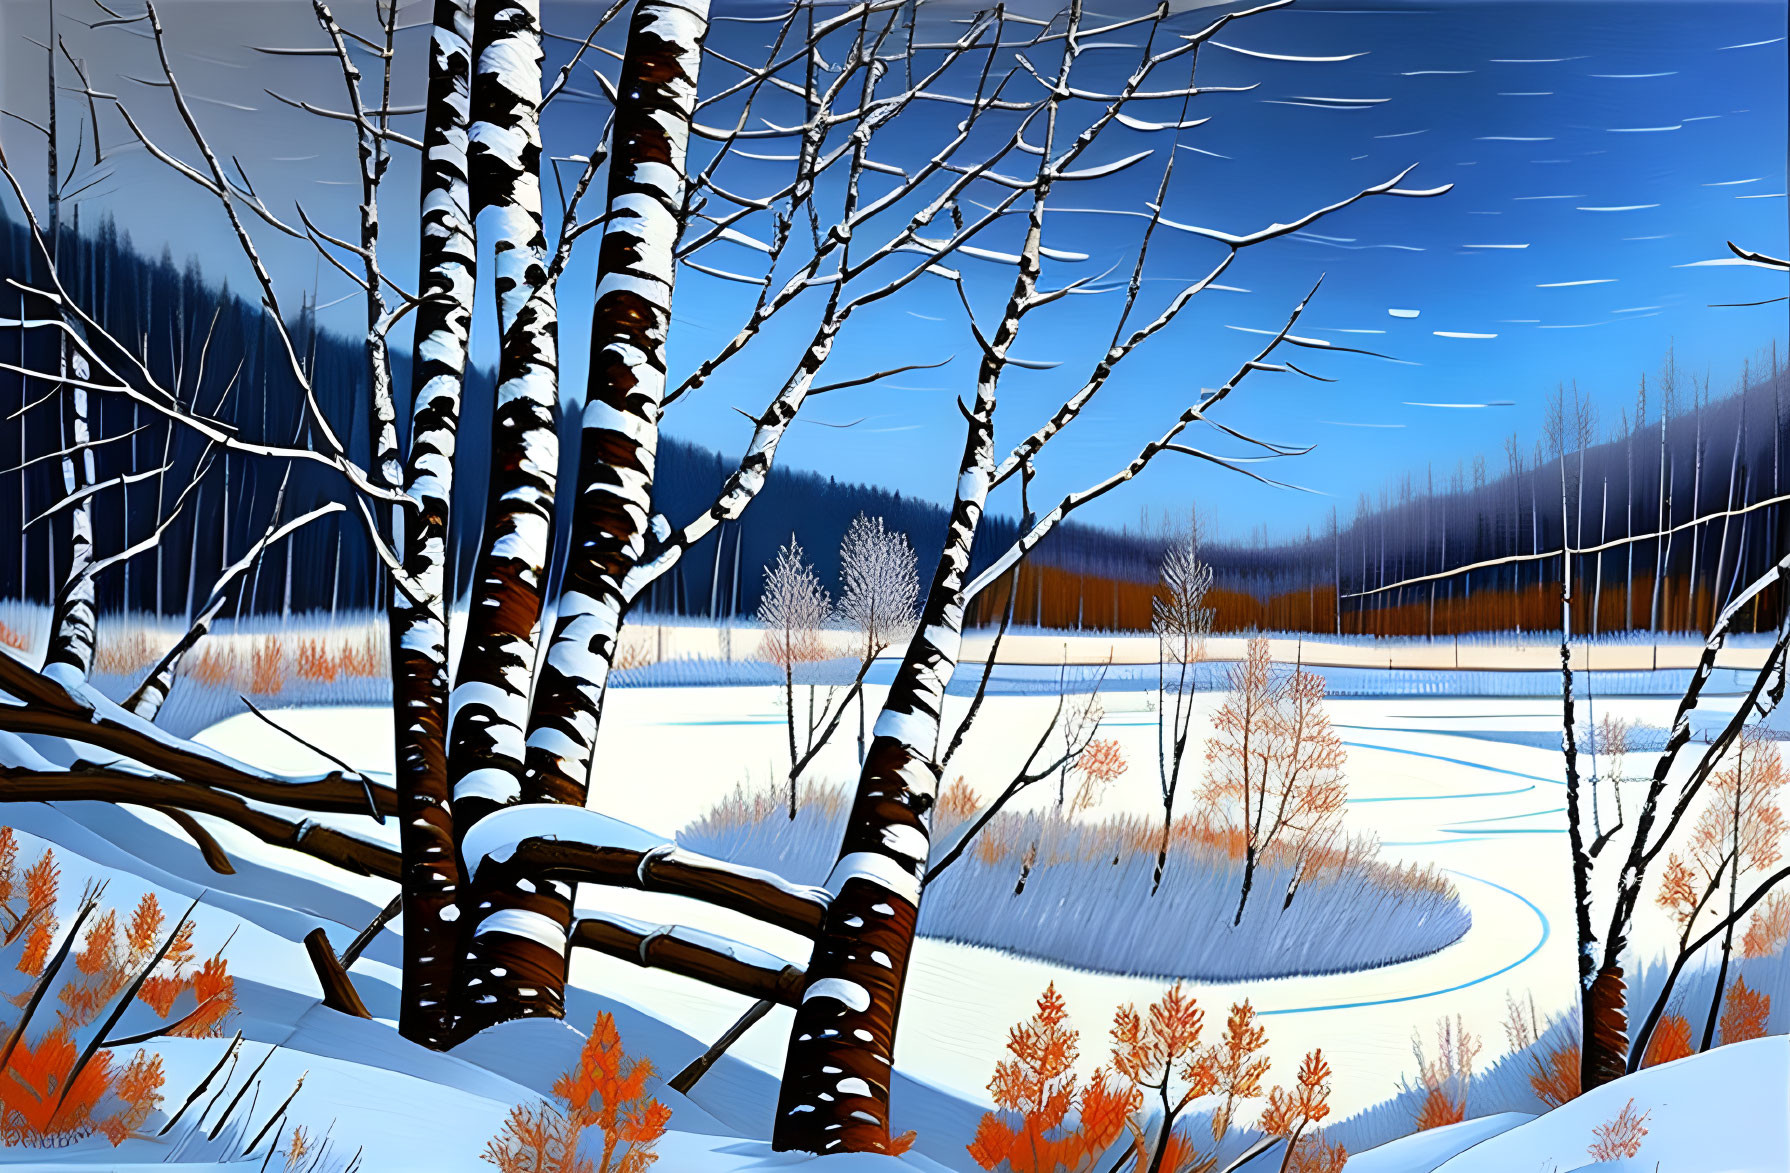 Winter landscape with birch trees, frozen river, and forested hills